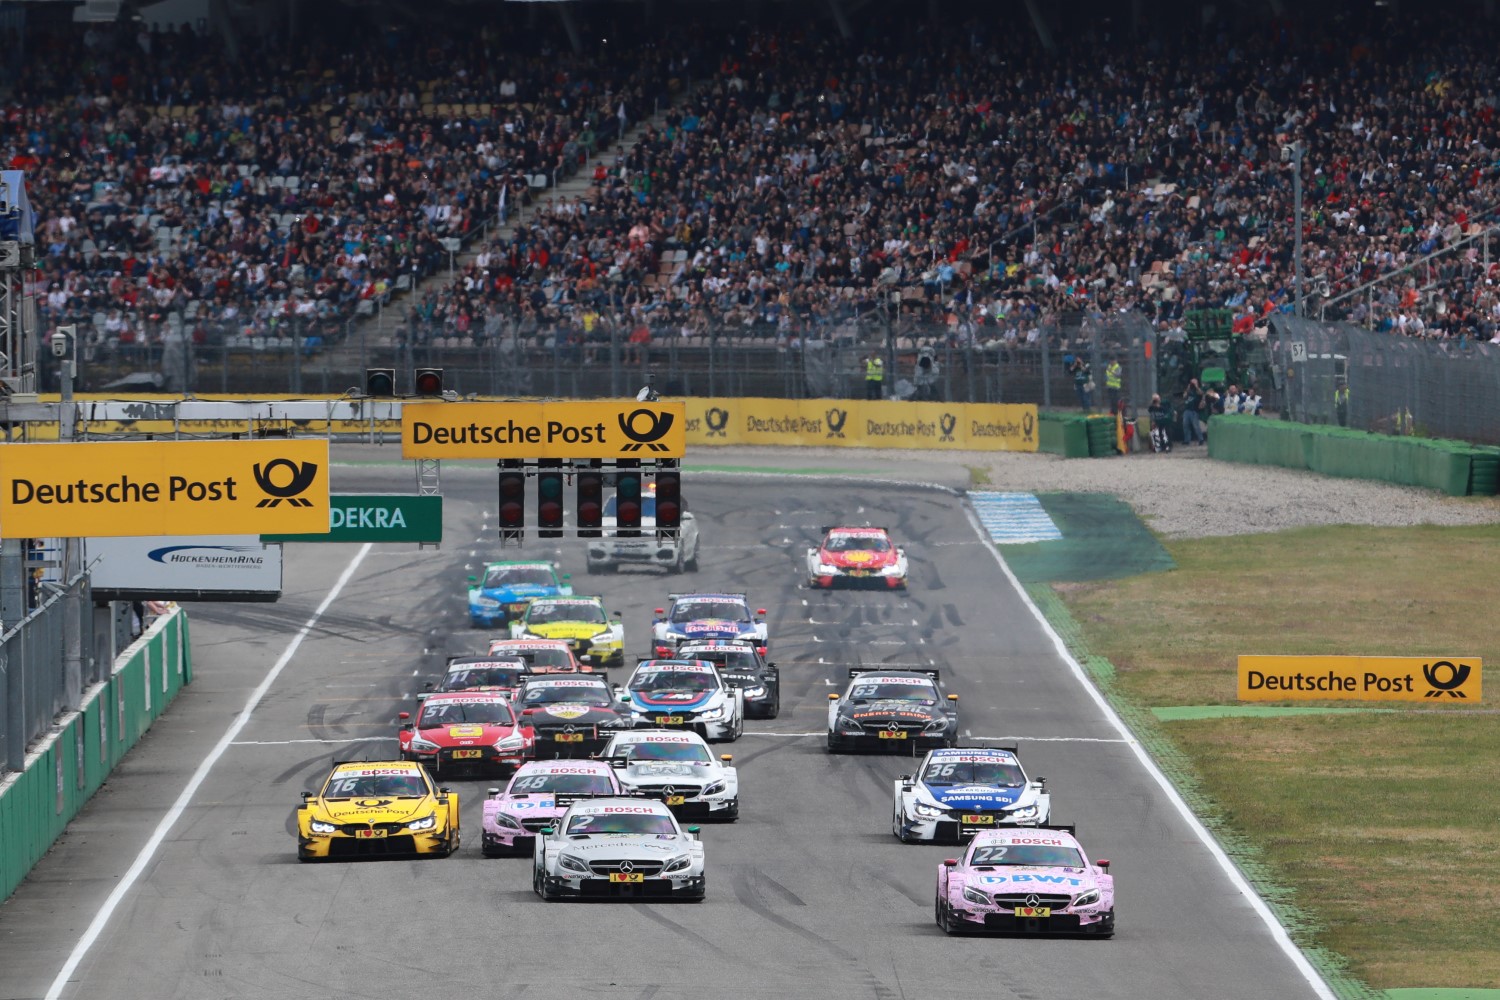 DTM is rather popular now, but if Audi and BMW follow Mercedes out the door DTM will cease to exist.